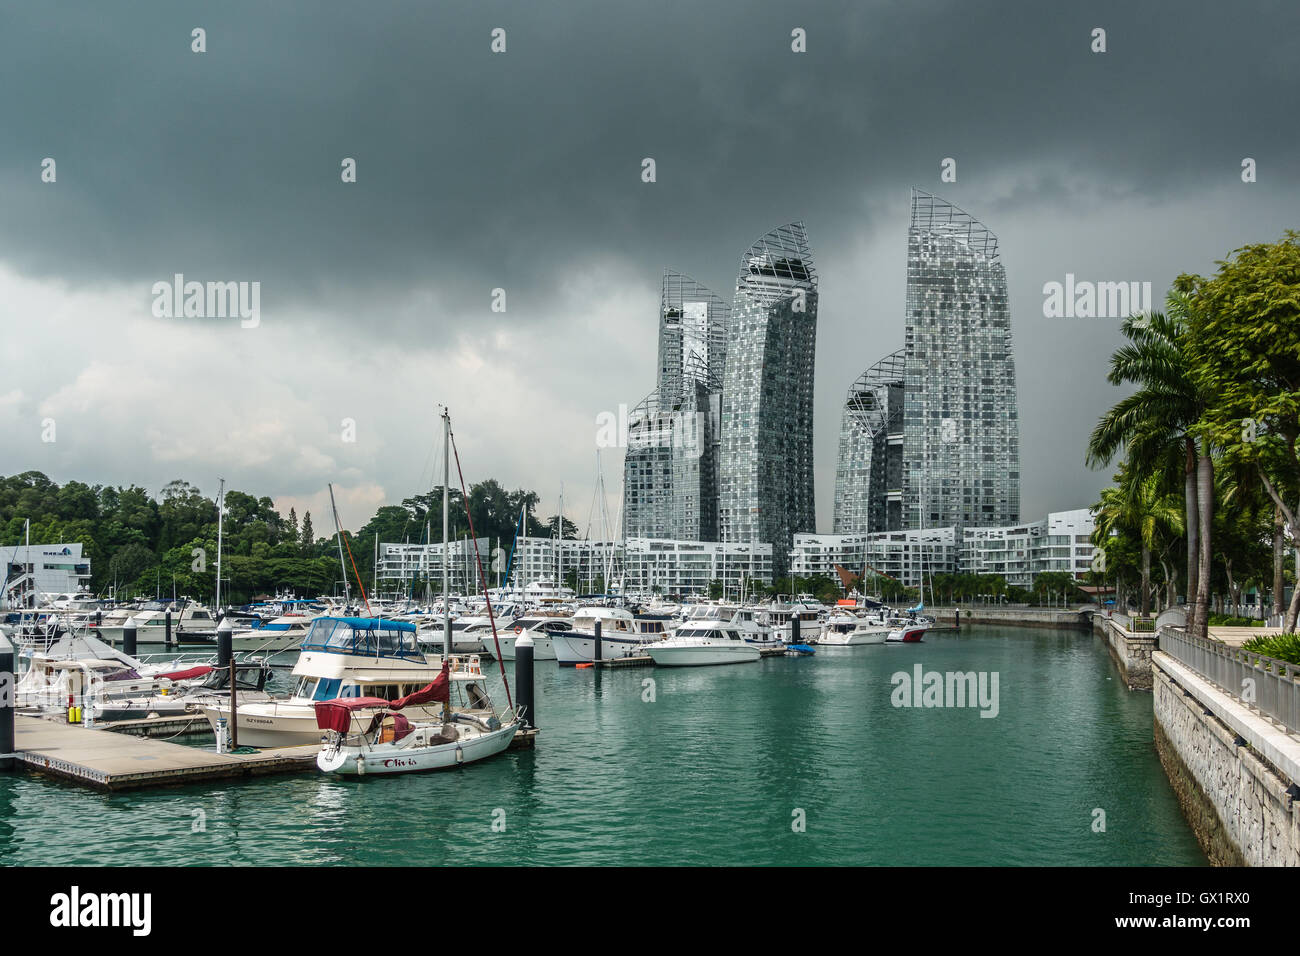 Keppel Bay Marina e riflessioni a Keppel Bay Luxury Waterfront complesso residenziale a Singapore Foto Stock